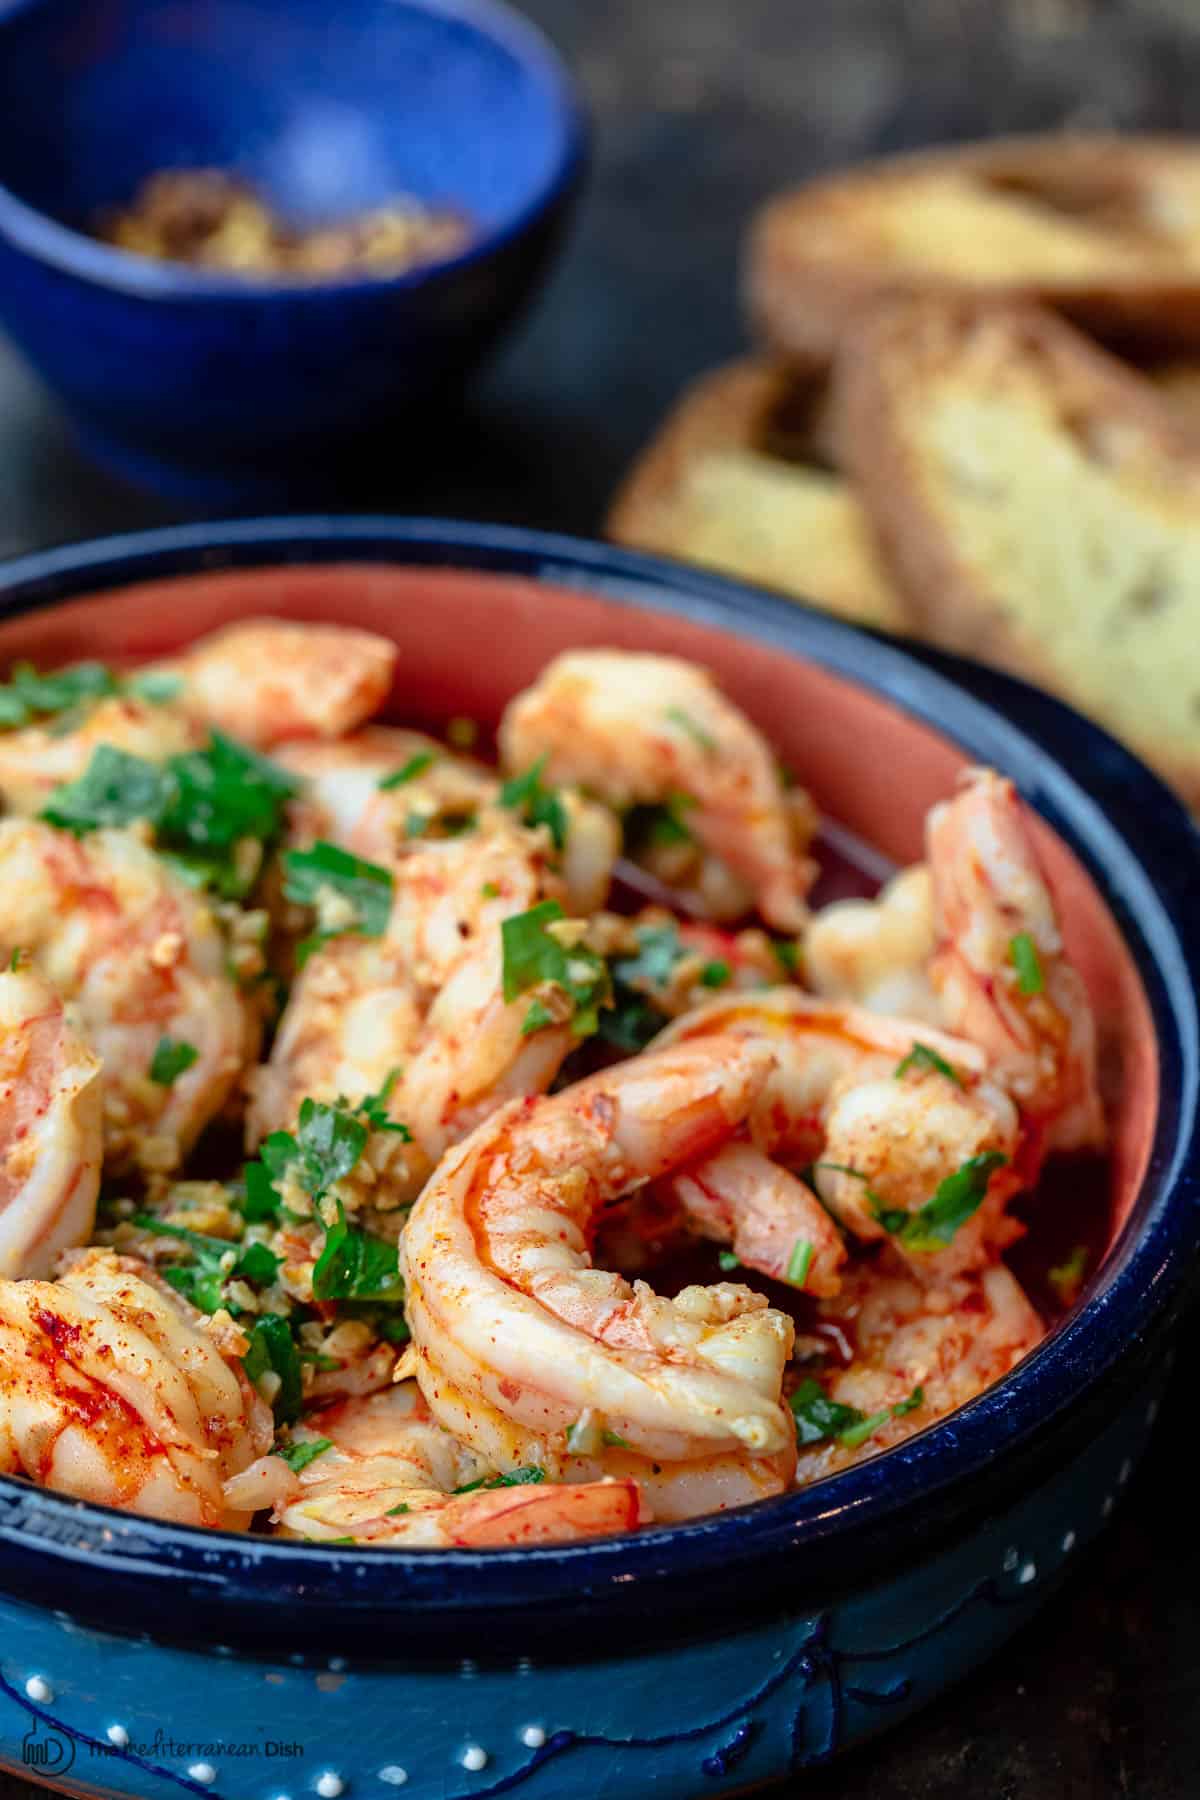 Spanish gambas al ajillo with a side of toasted bread and red pepper flakes